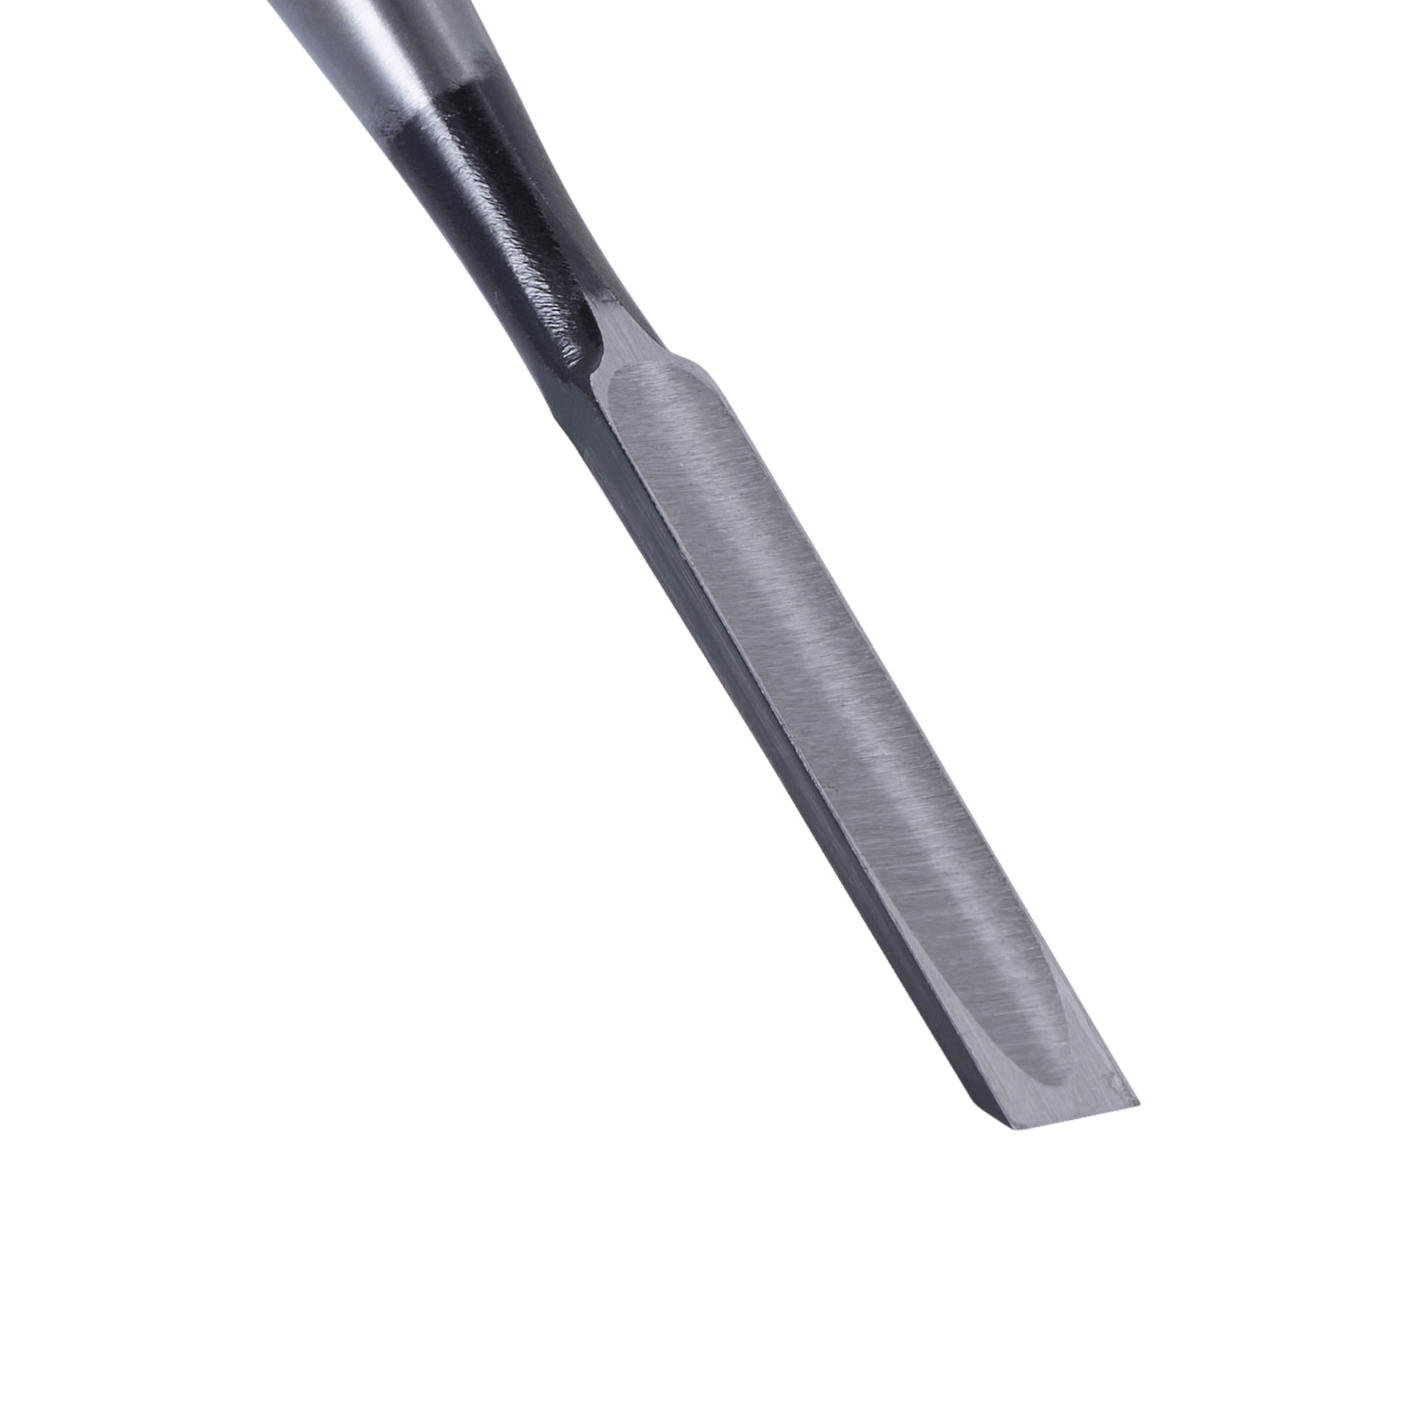 Ouchi-san Chisels - Bench Chisels - Japanese Tools Australia